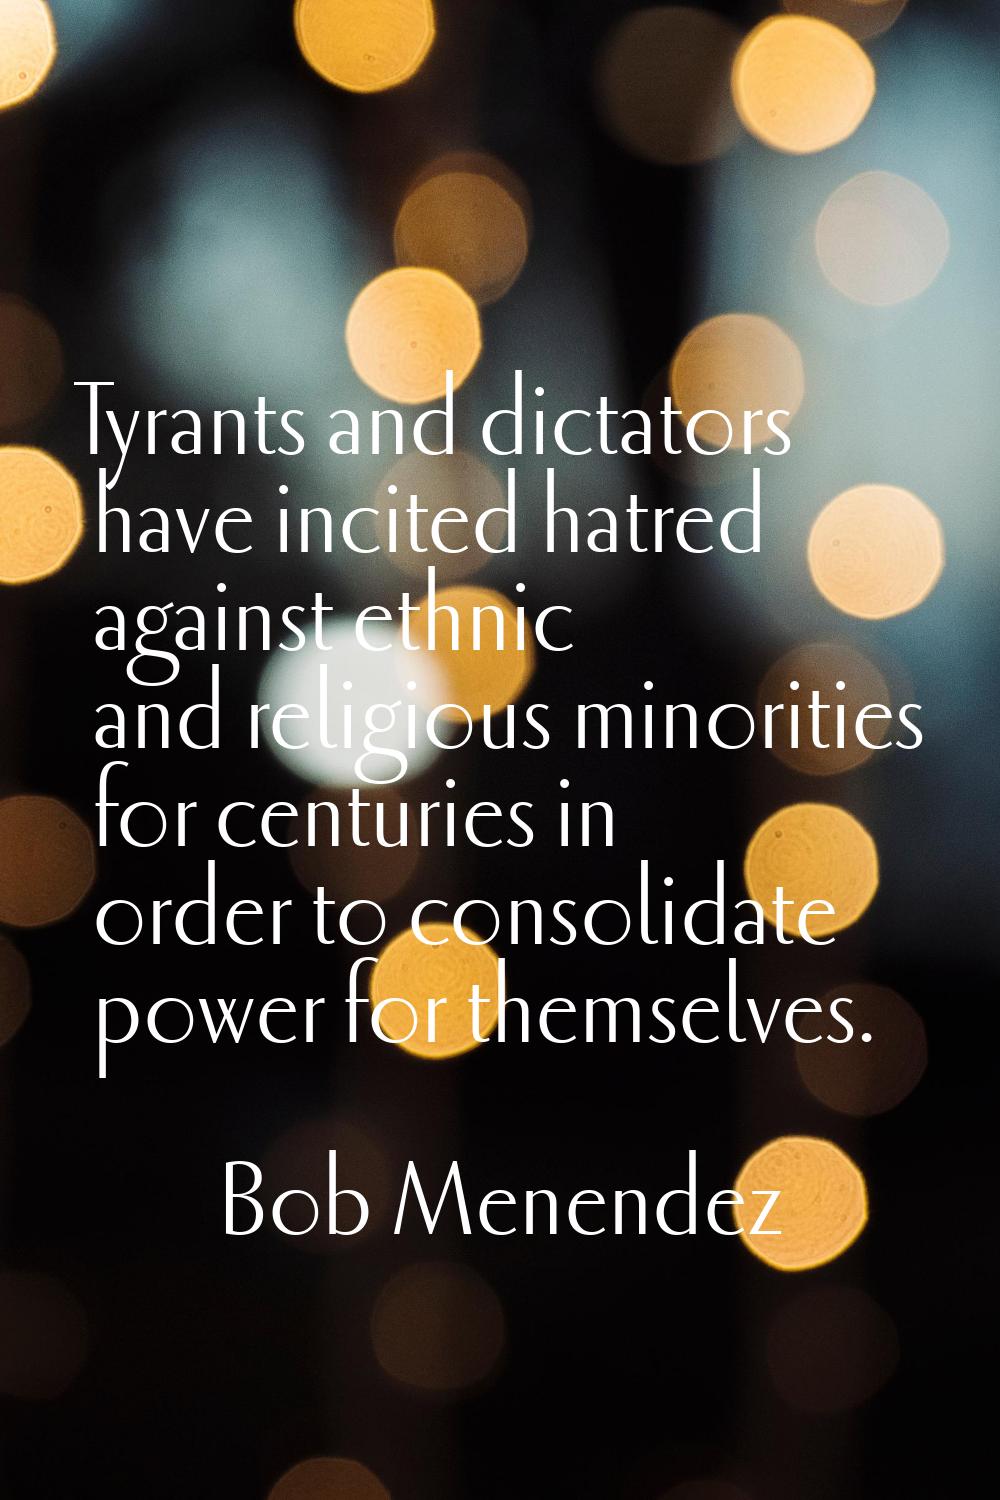 Tyrants and dictators have incited hatred against ethnic and religious minorities for centuries in 